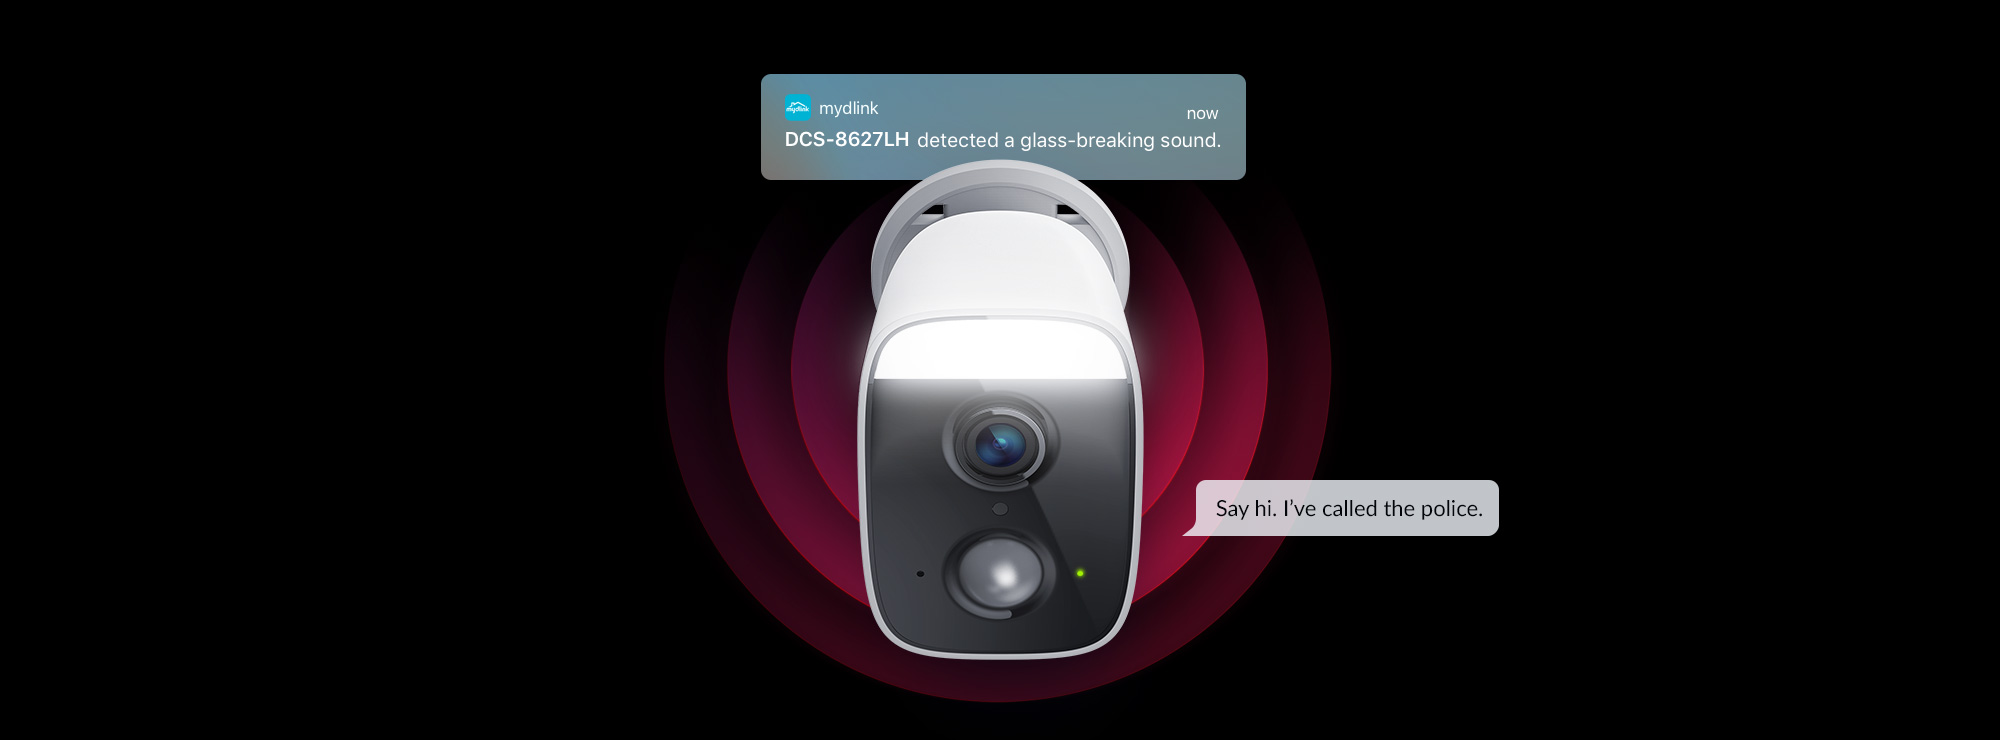 DCS-8627LH Full HD Outdoor Wi-Fi Spotlight Camera using Glass Breaking sound detection